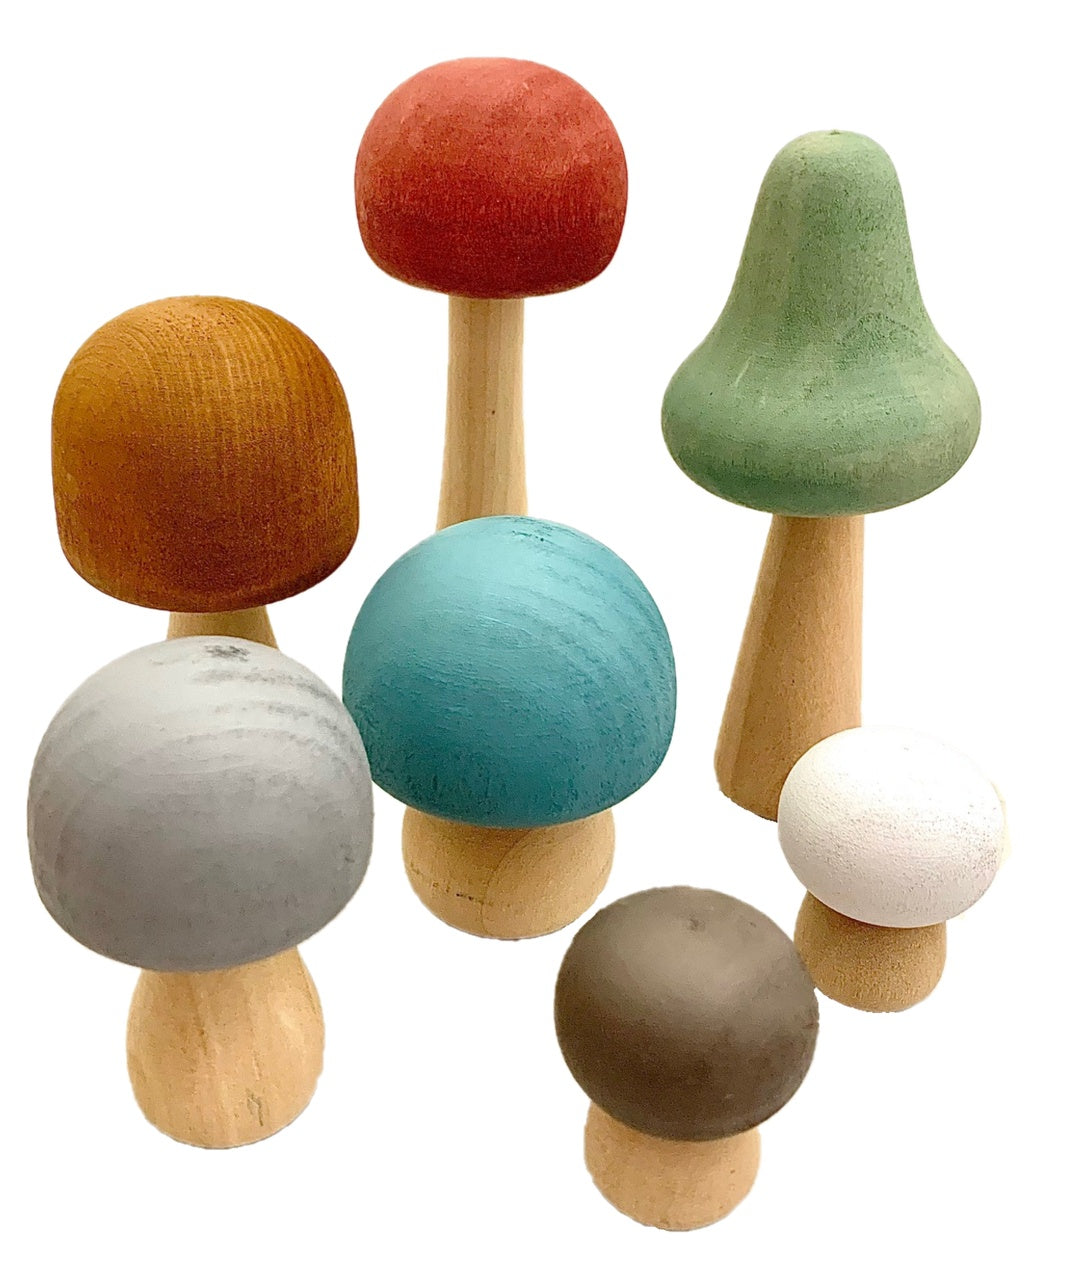 PAPOOSE - Earth Mushrooms - 7pc